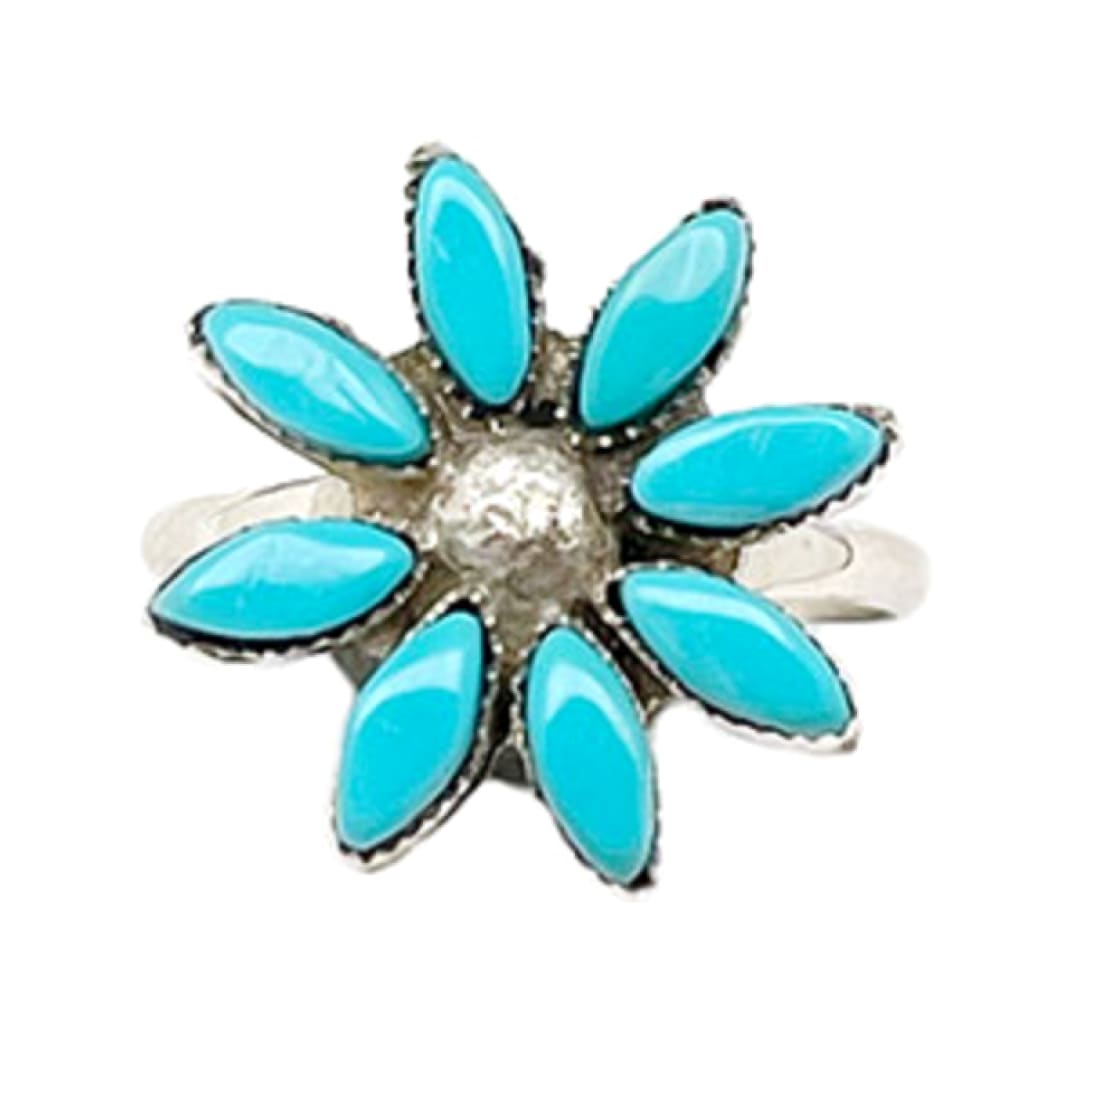 Zuni Sterling Silver Turquoise Cluster Ring Size 7.5 D